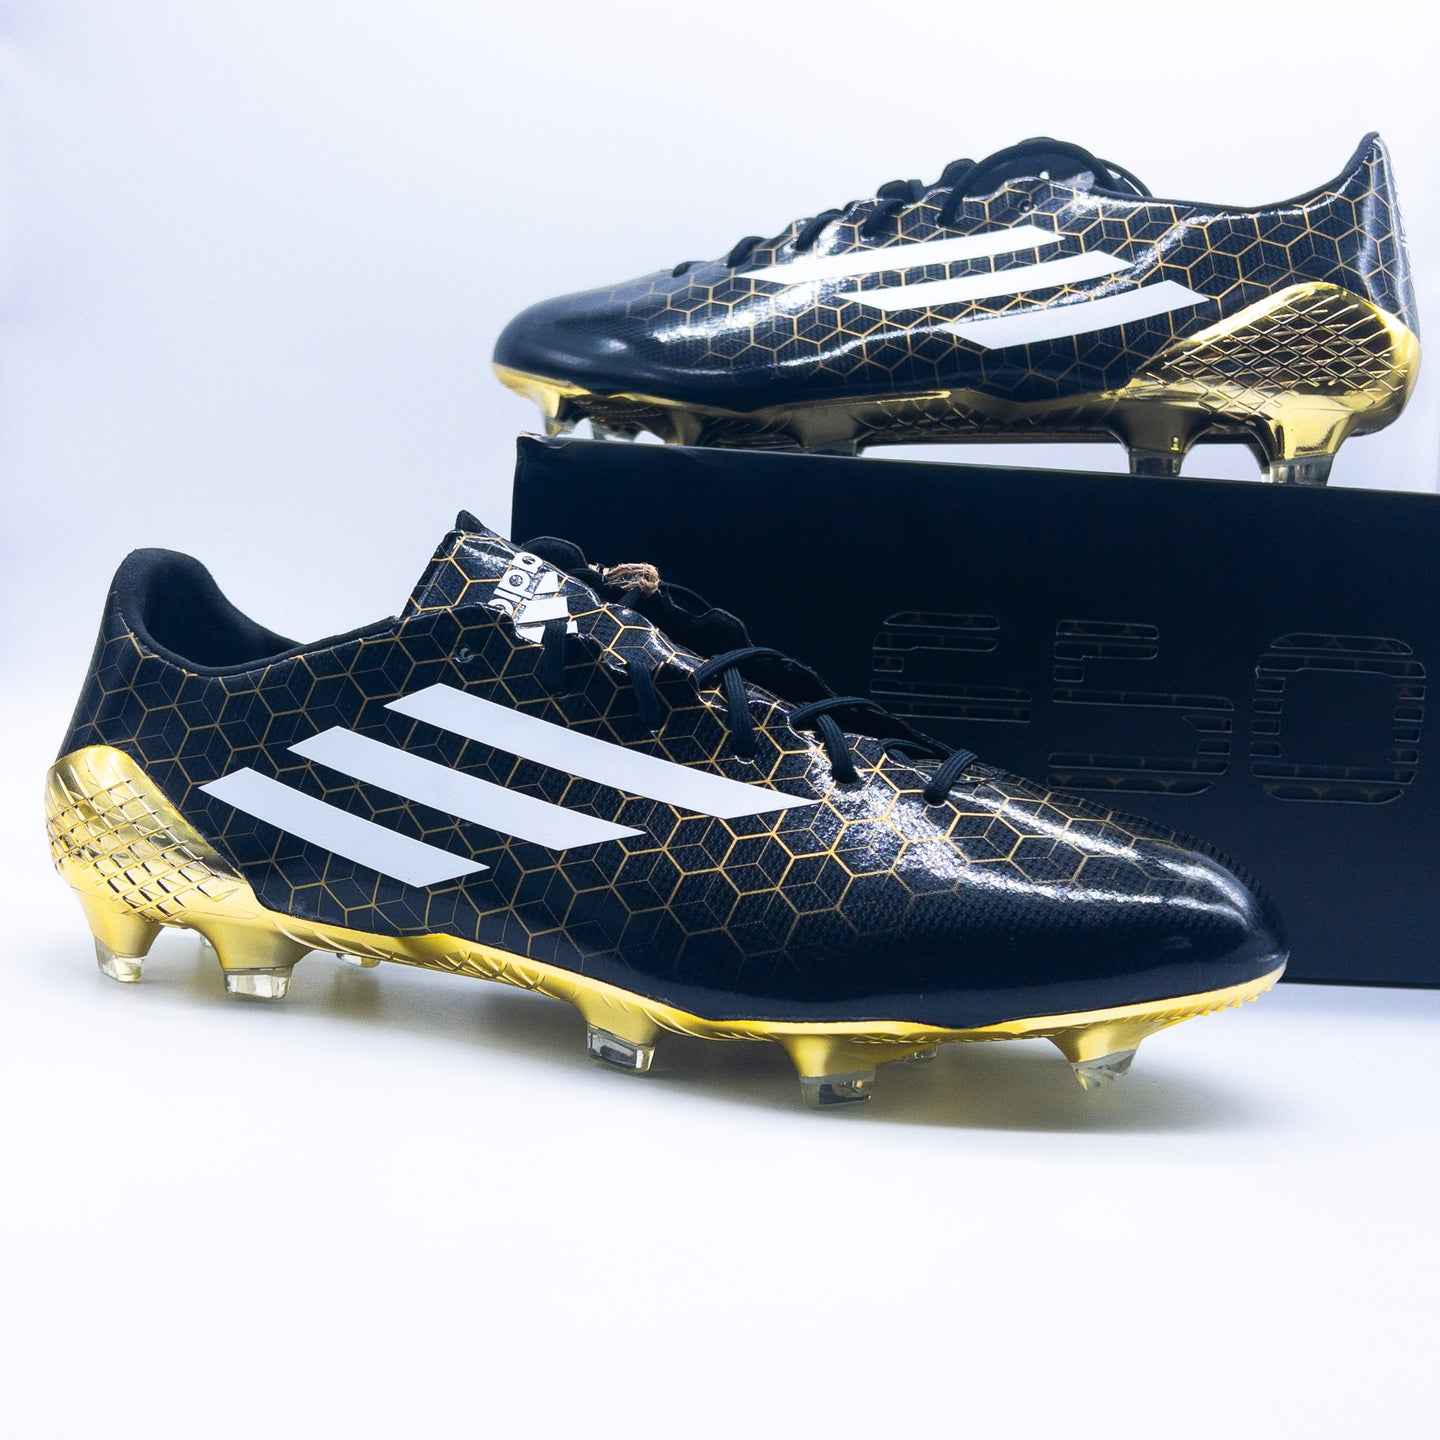 F50 Ghosted Adizero Crazylight Memory Lane FG Limited Edition